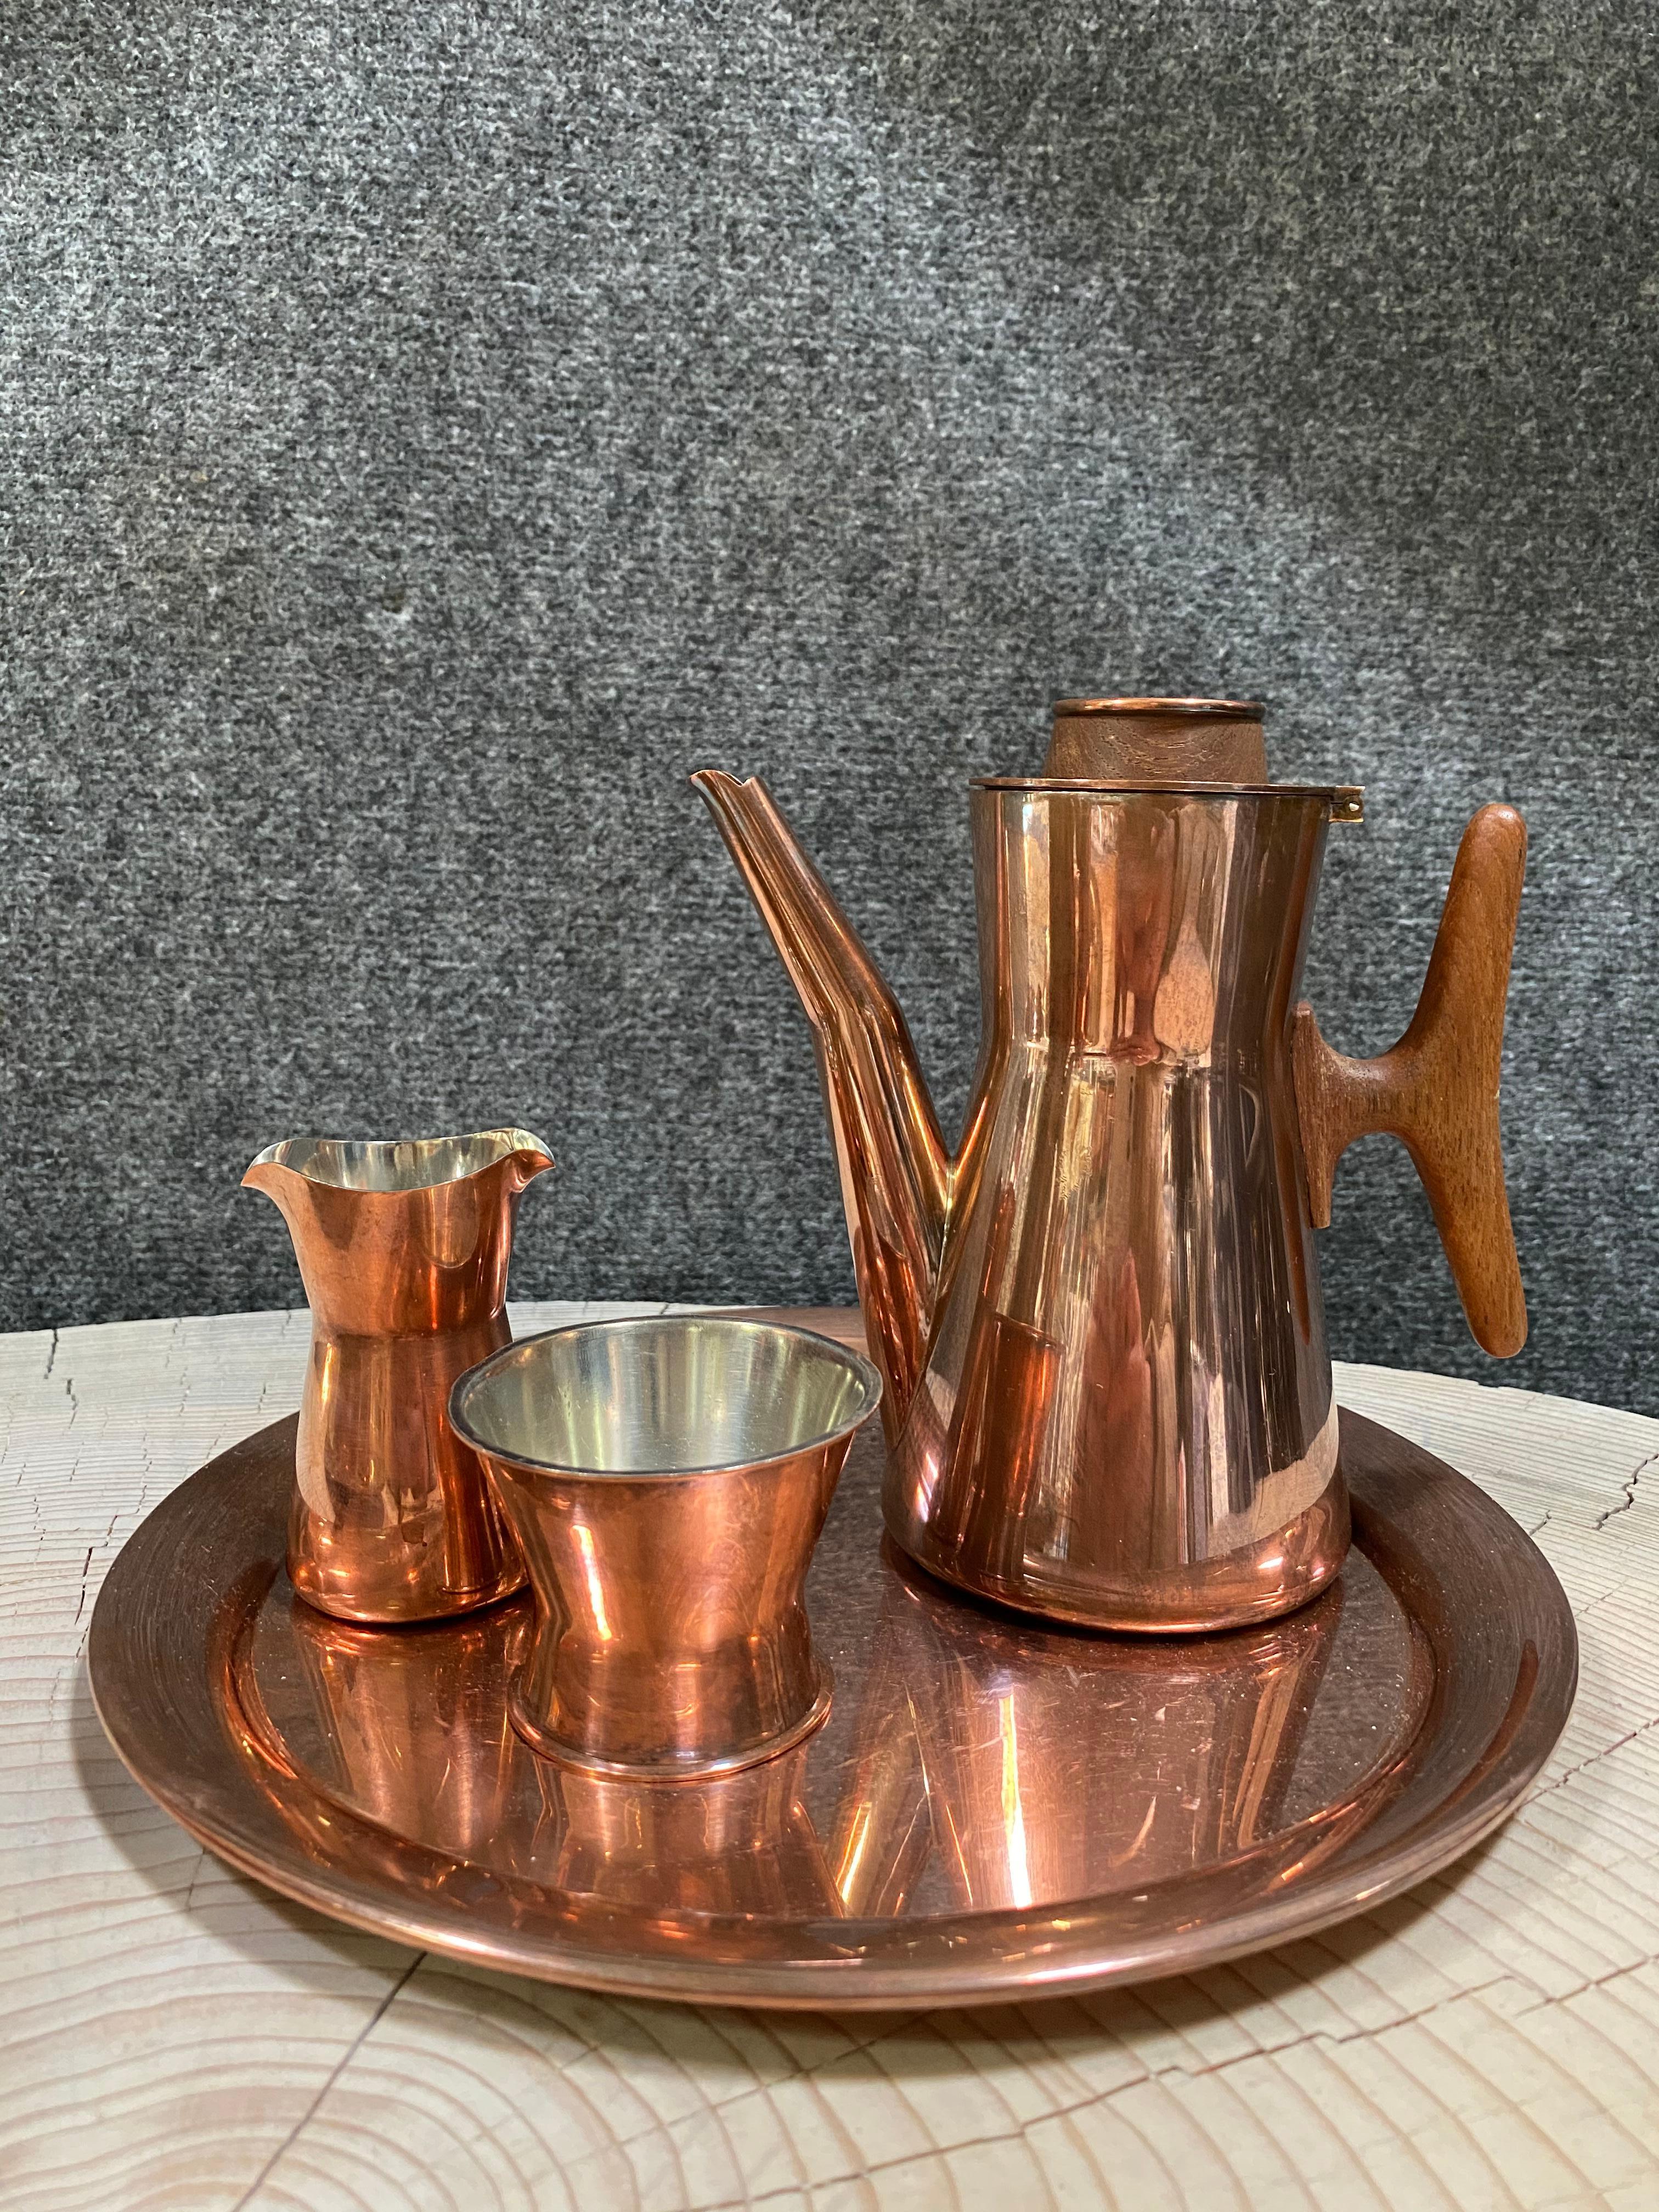 Tapio Wirkkala 2 Coffee sets Copper and Silver
Including total 8 pieces.
Hopeakeskus Oy Hämeenlinna Finland.
Rare.
TAPIO WIRKKALA, COFFEE FURNITURE, 8 parts, copper and teak, TW 163/164, Kultakeskus, 1960s-70s. Formulated in 1961.

Copper,